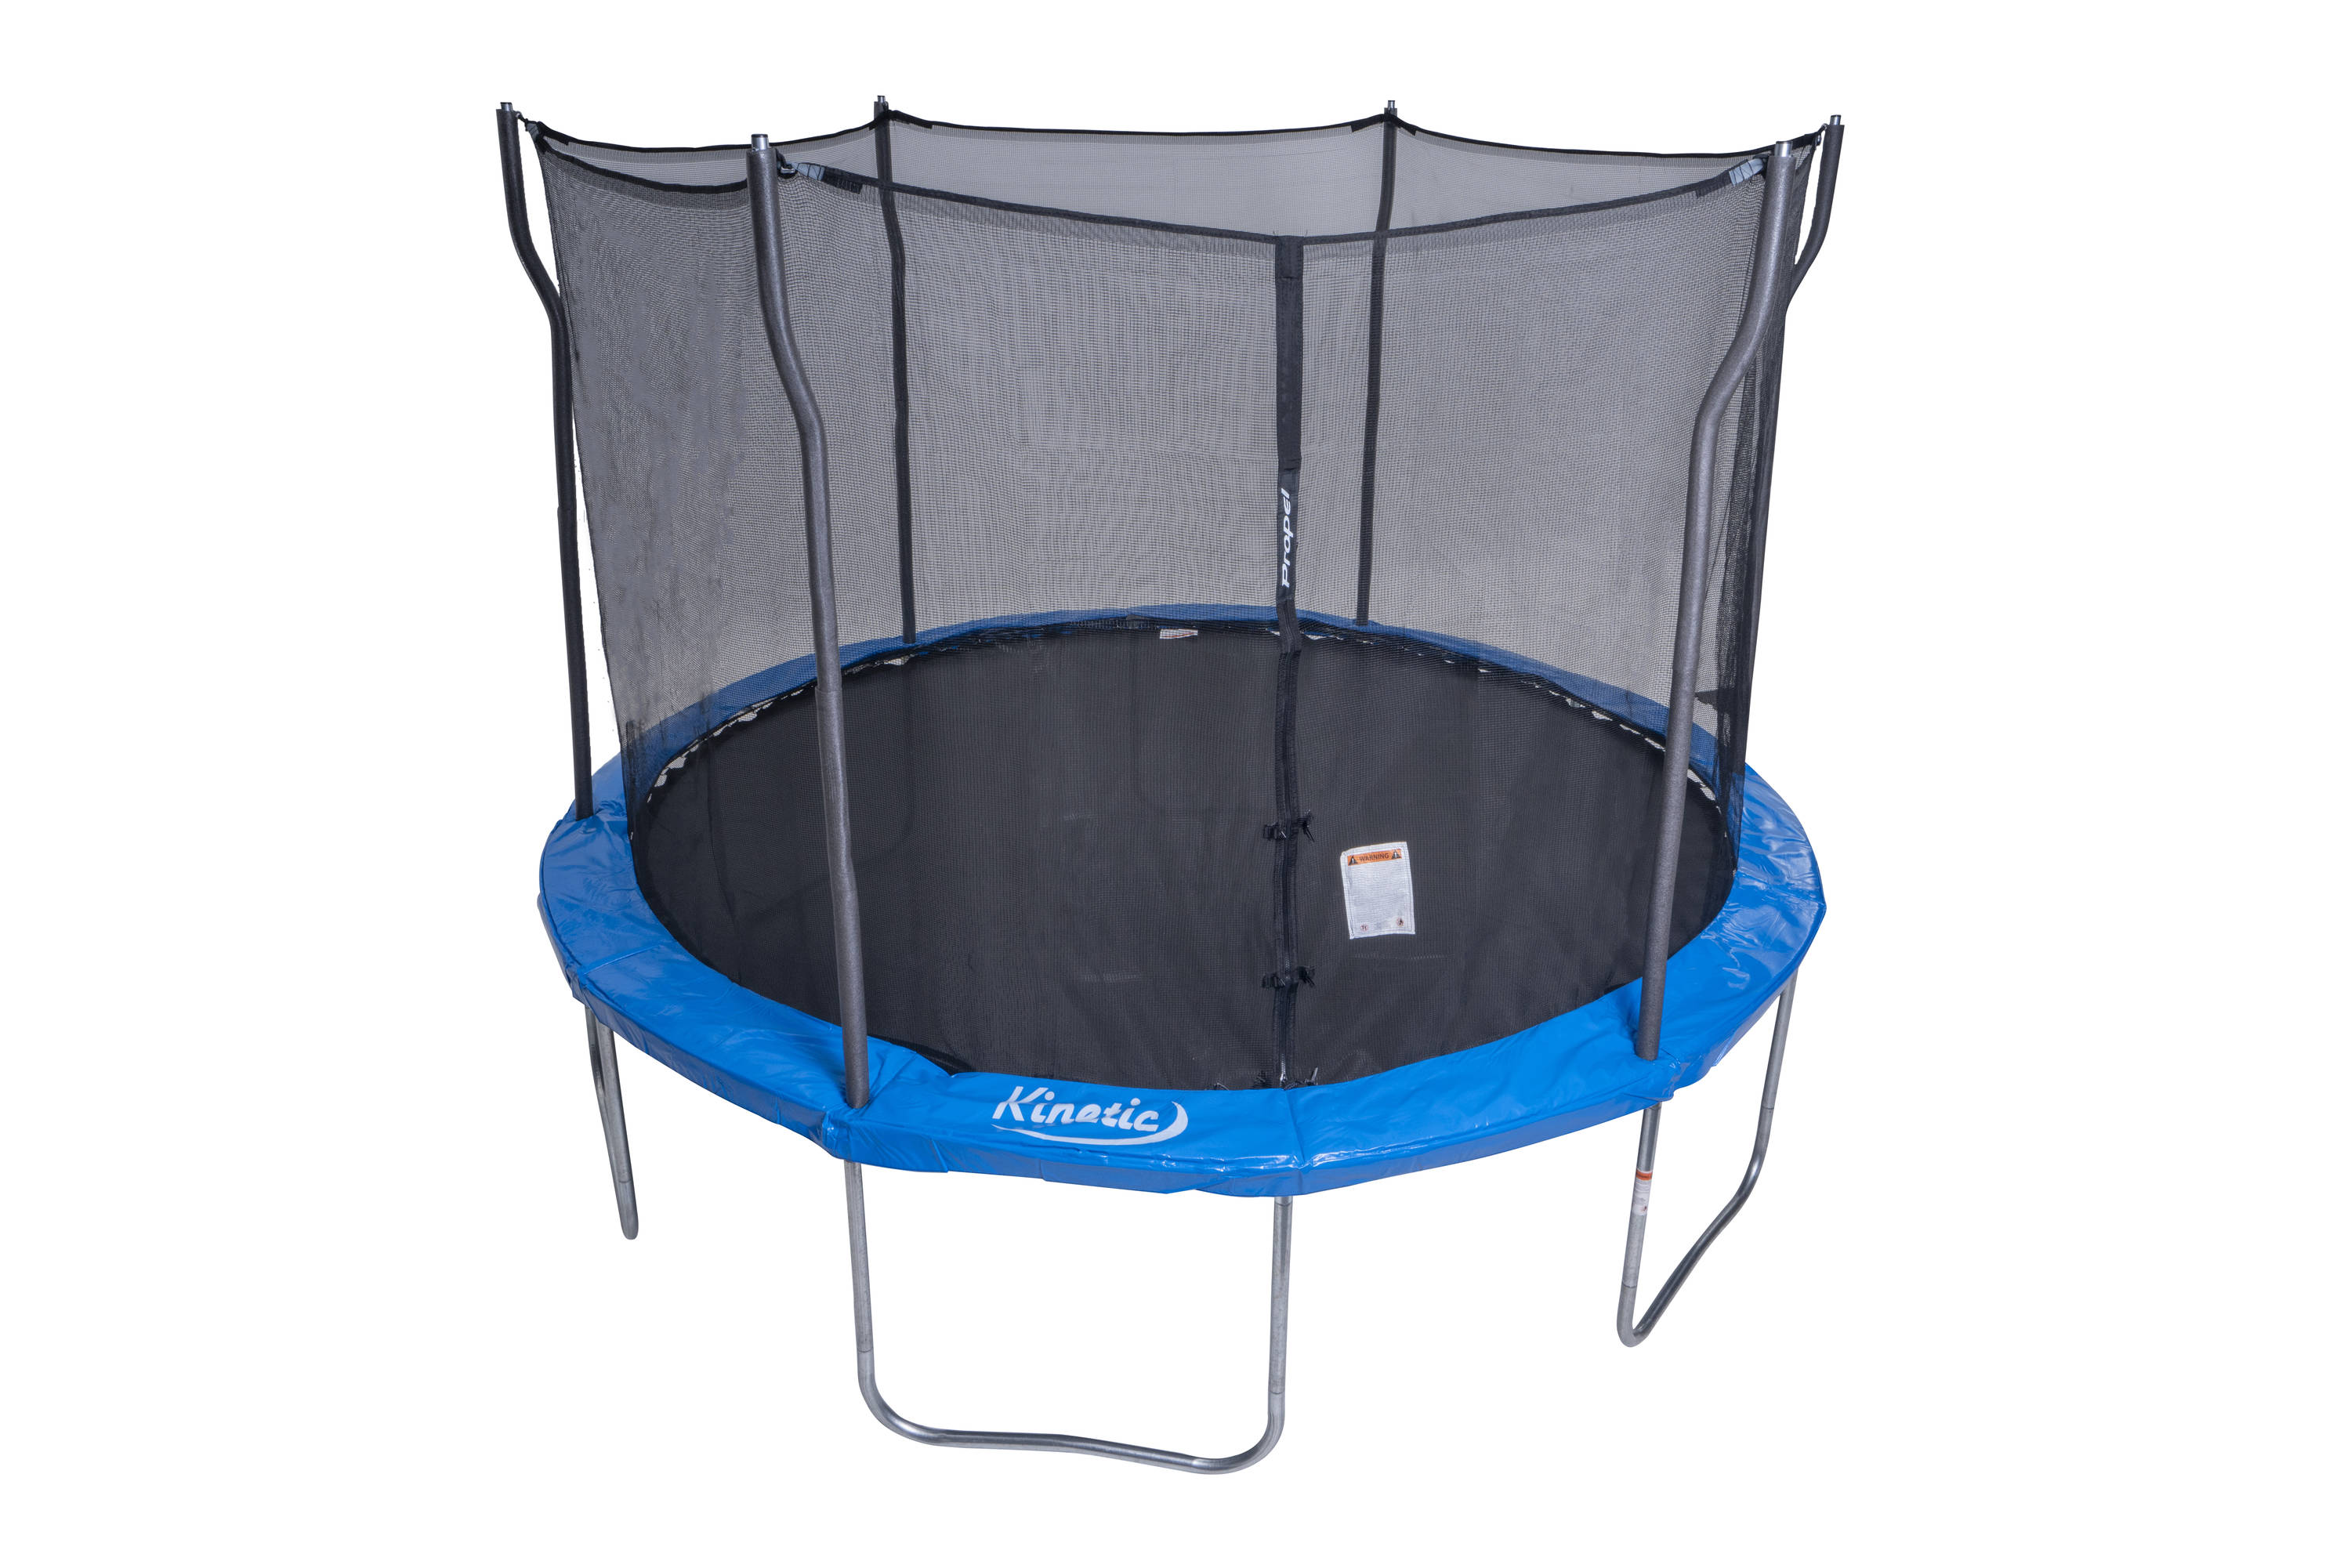 Propel Trampolines 12 foot trampoline 12-ft Backyard Blue in the department at Lowes.com